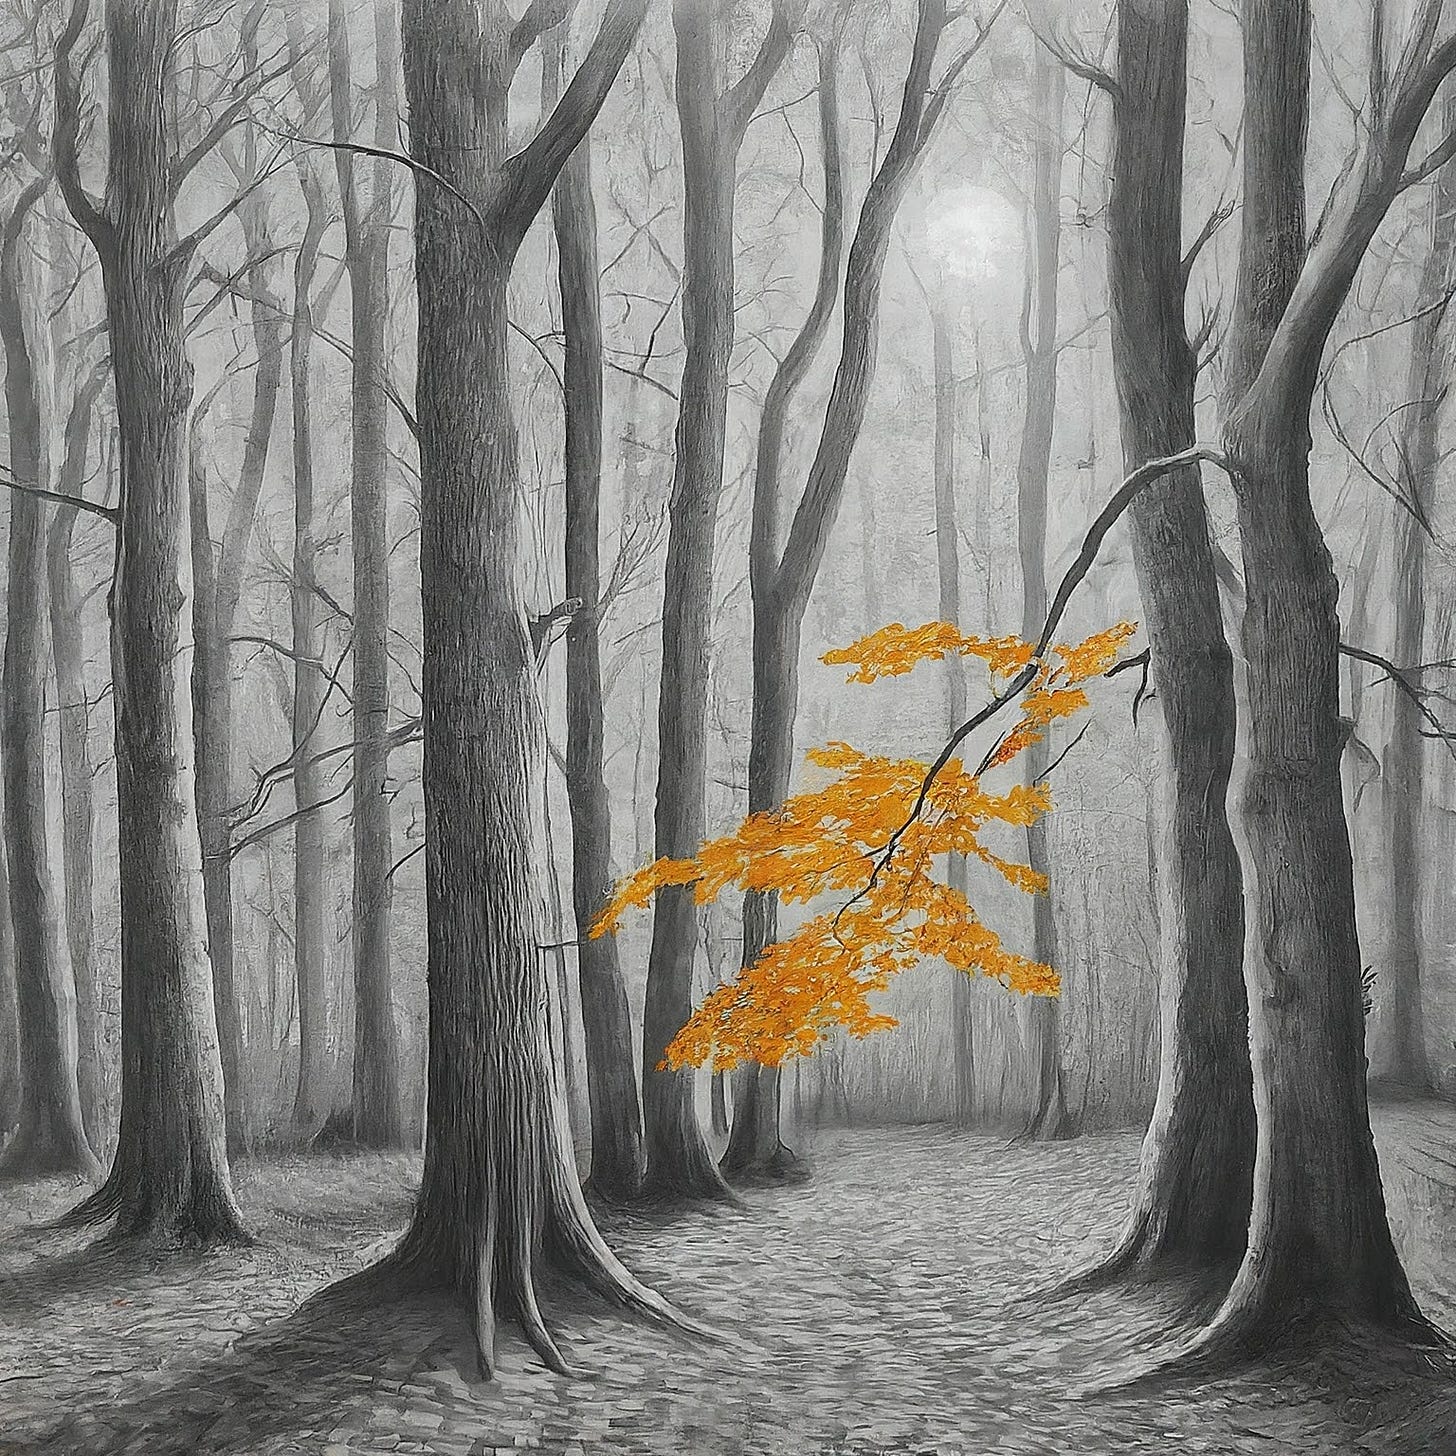 a pencil sketch of beech and oak woods at night. The only colour is golden beech leaves